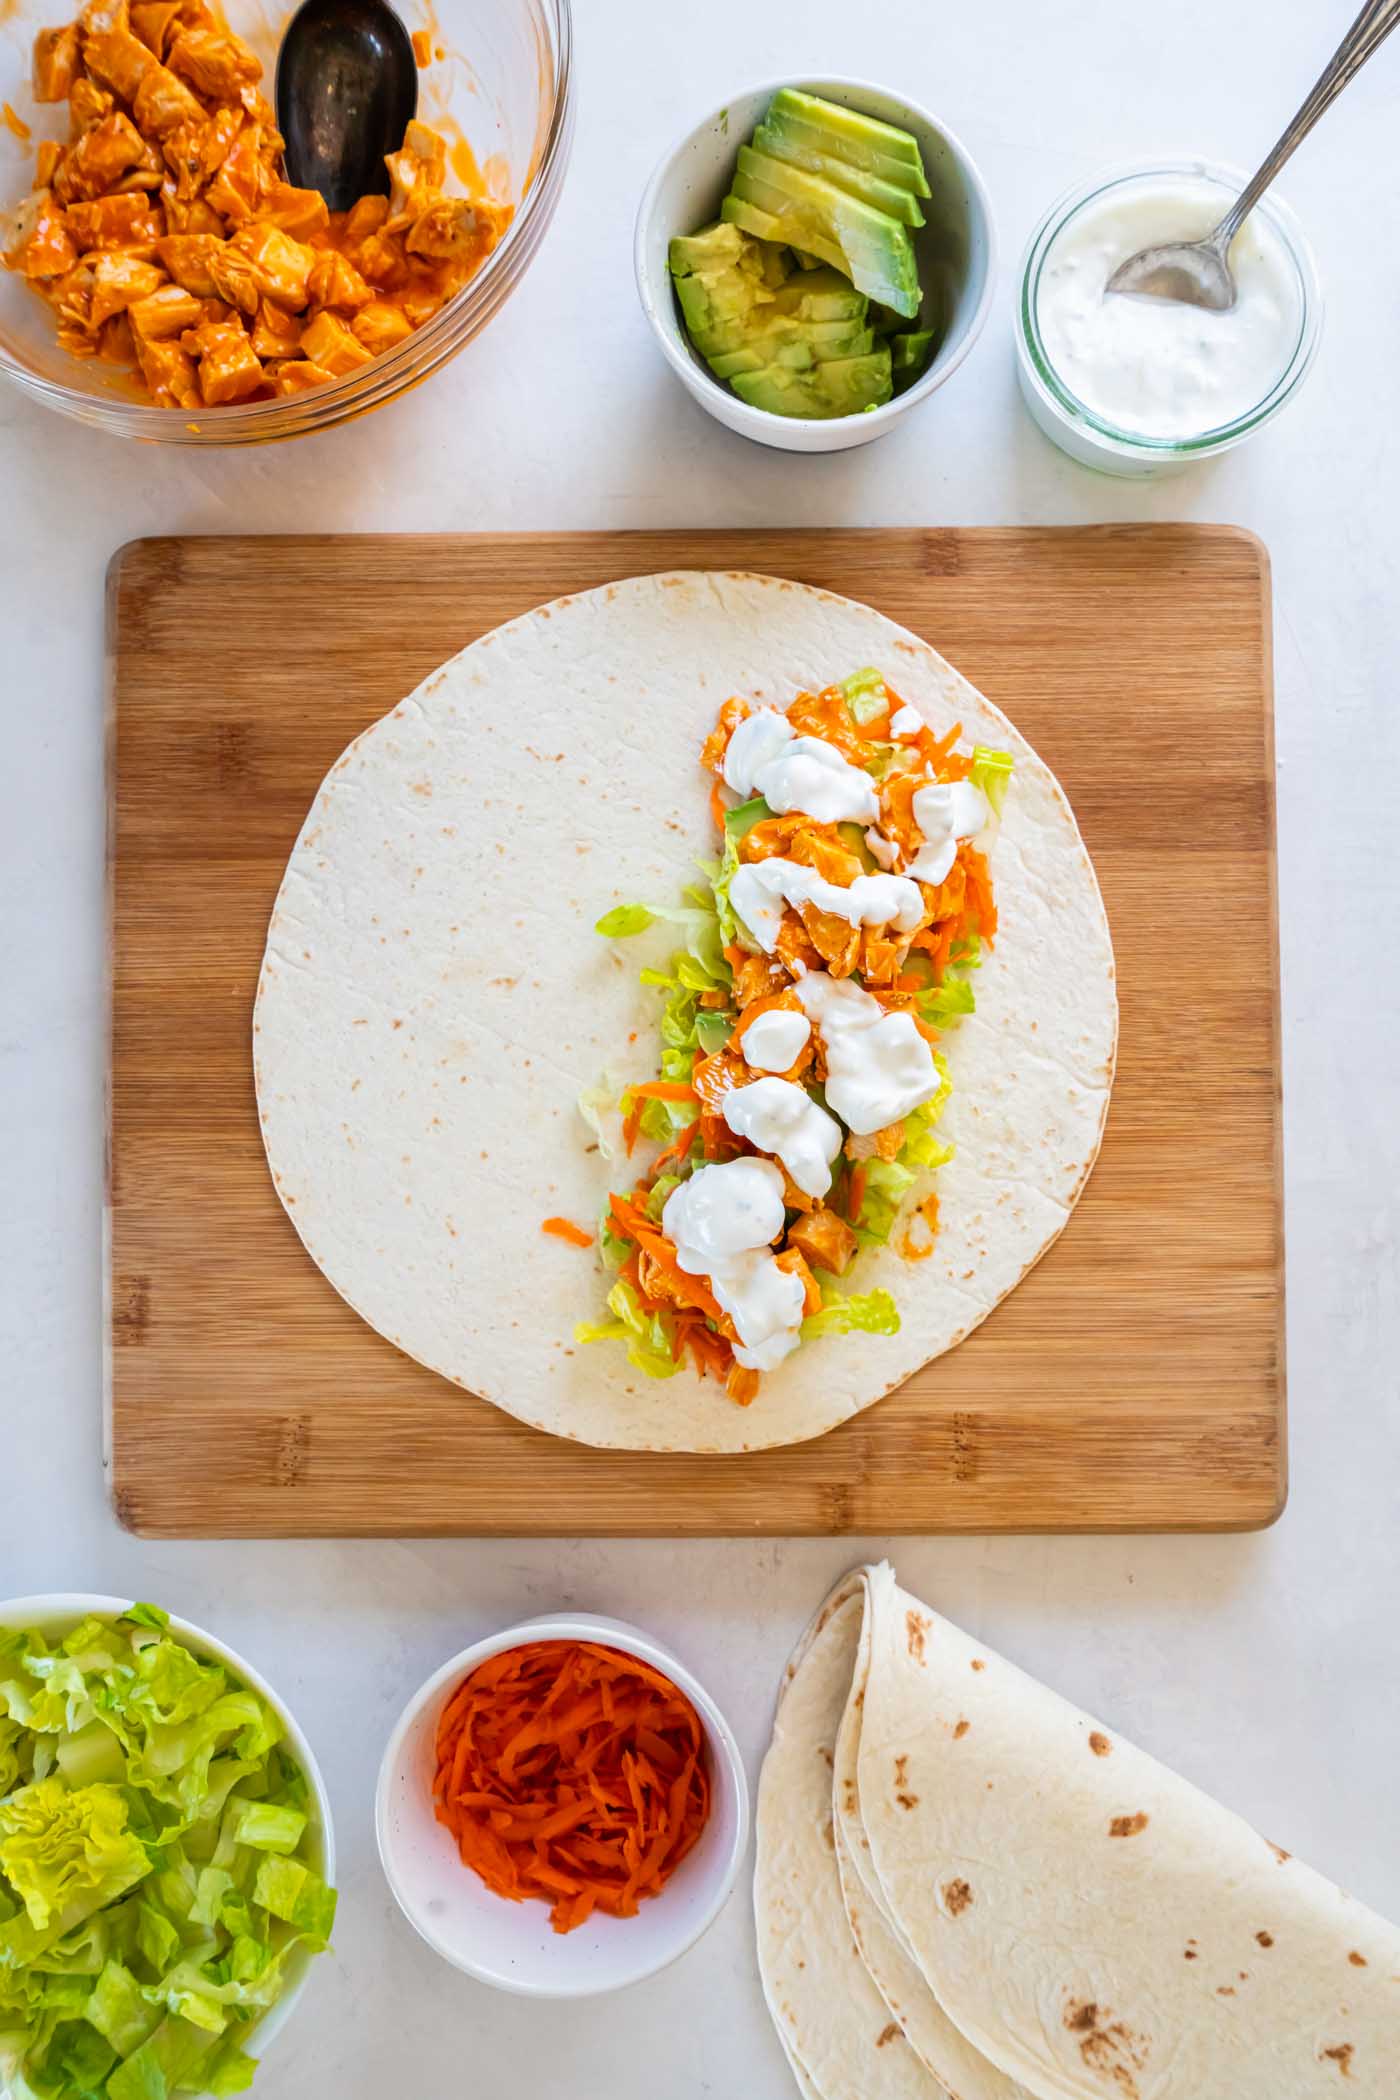 Tortilla with lettuce, shredded carrot, avocado, buffalo chicken and blue cheese dressing.